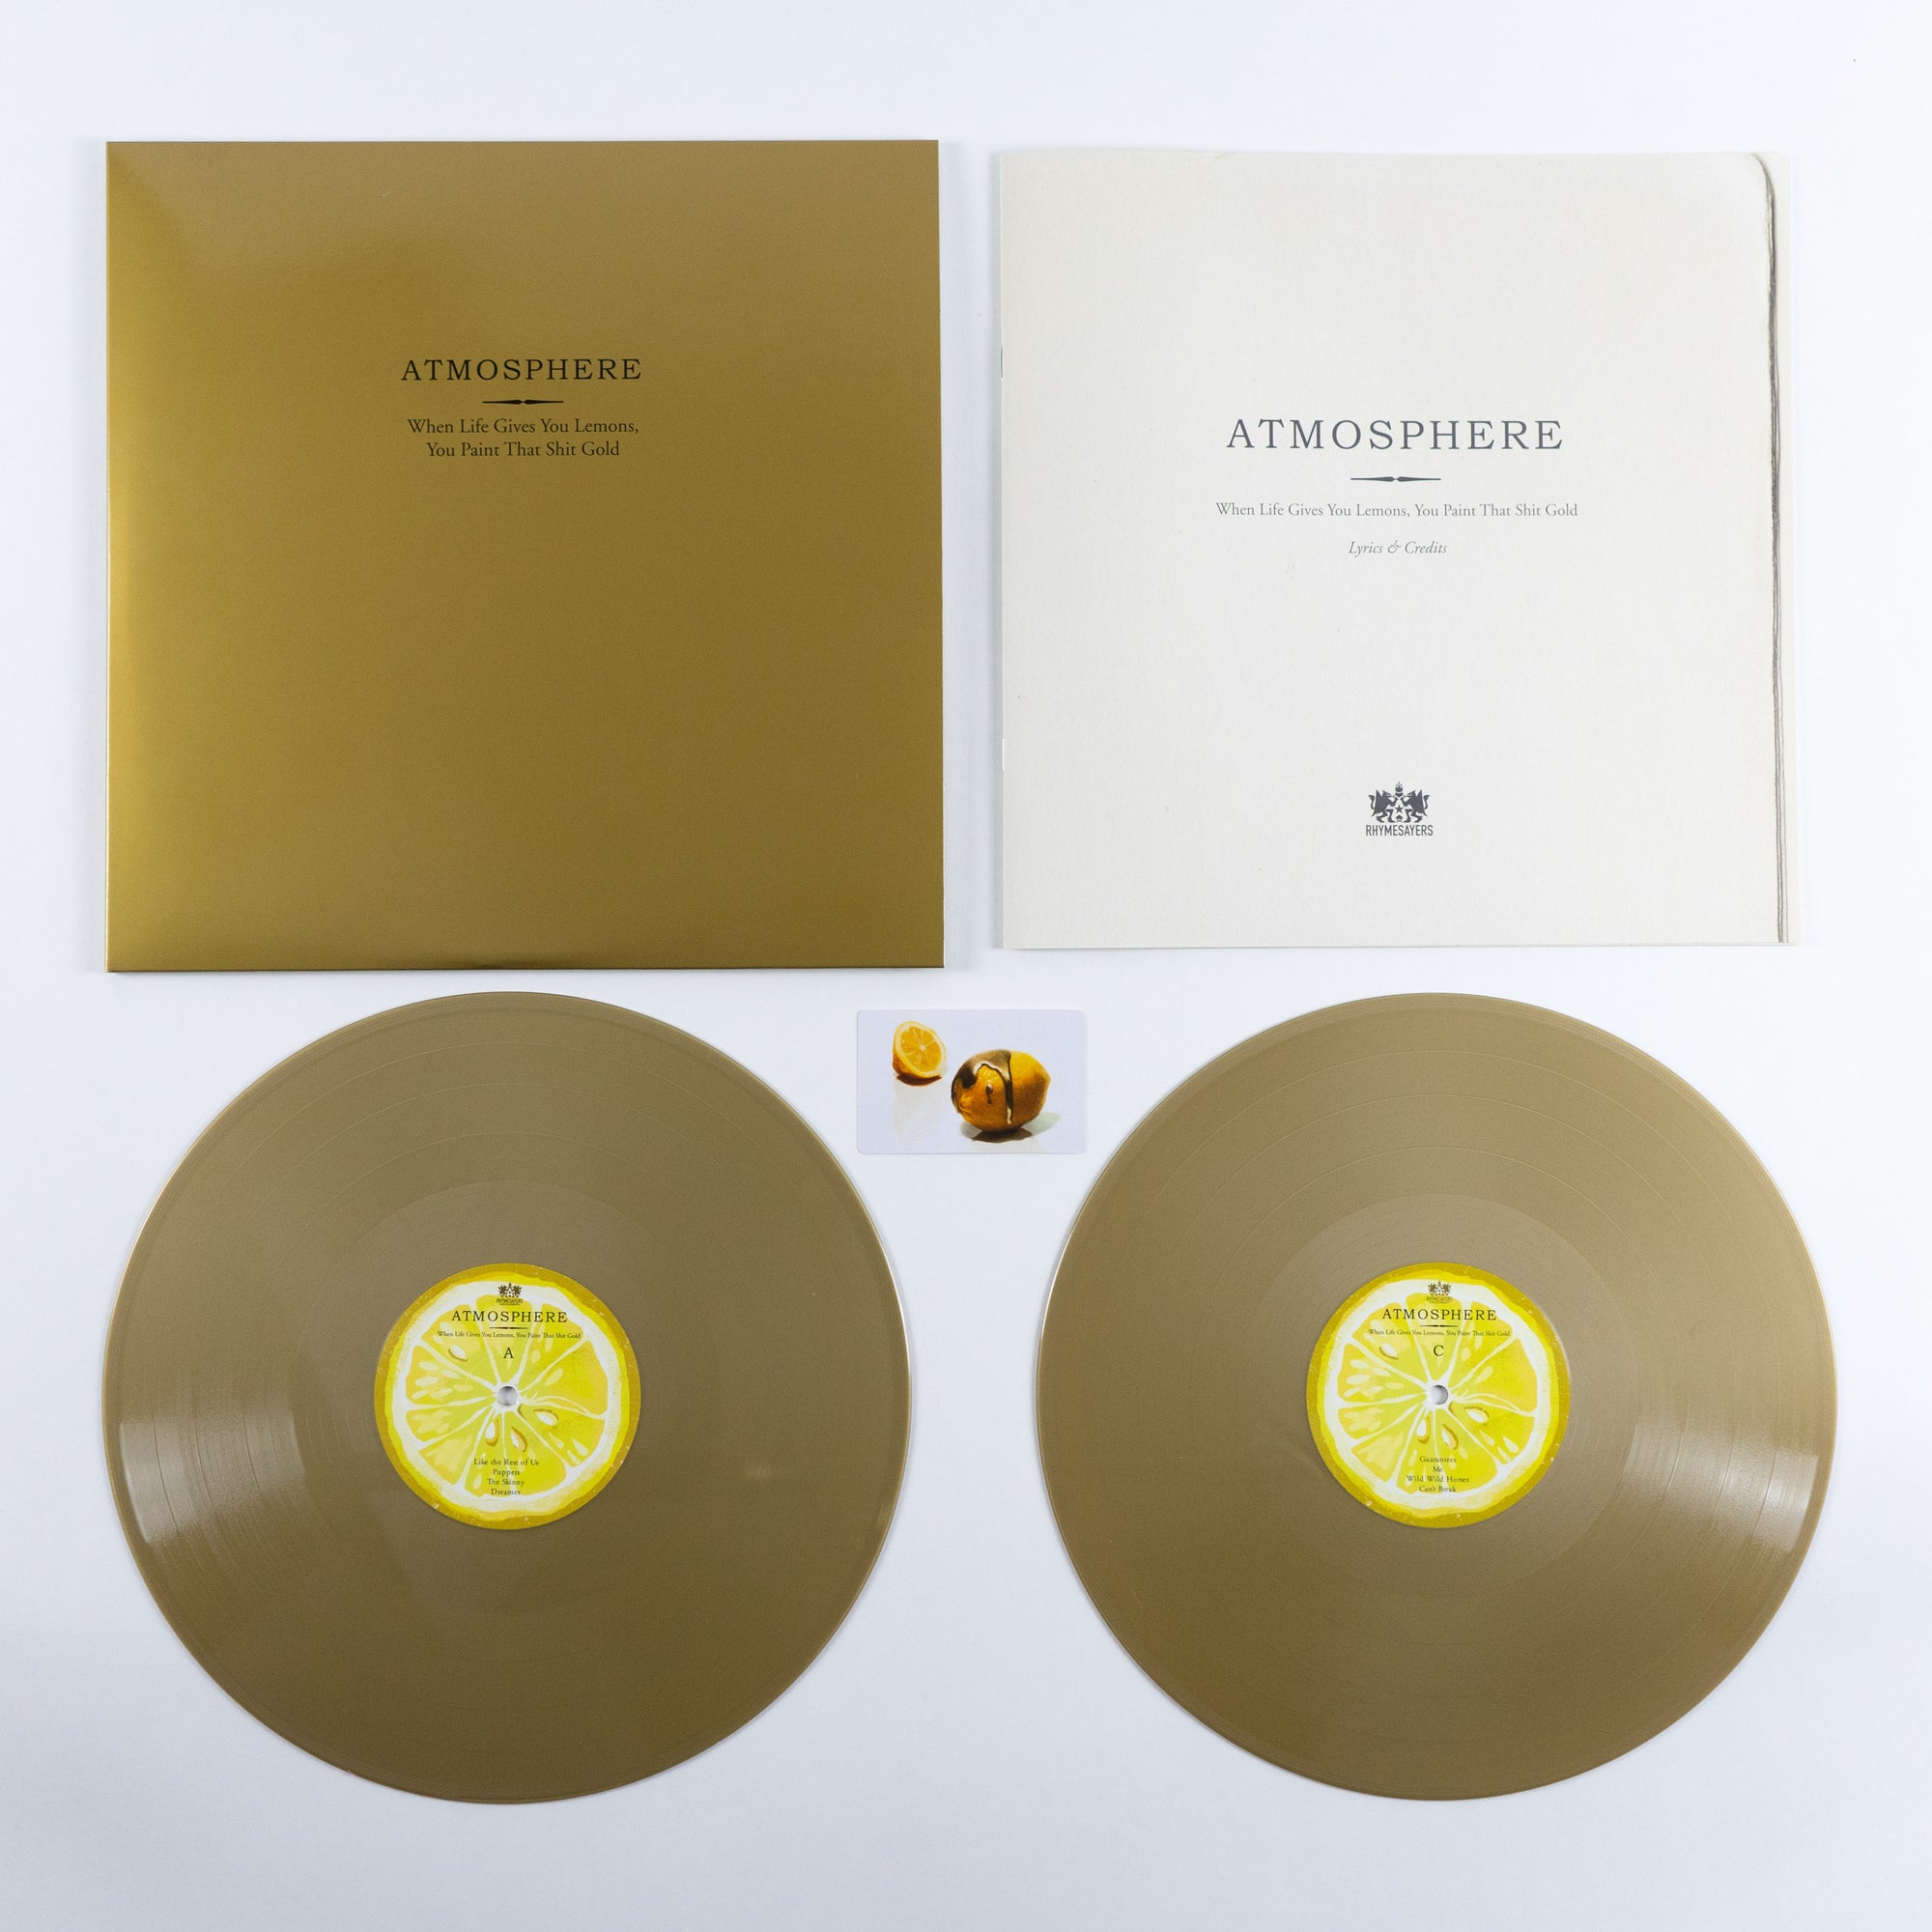 Atmosphere - When Life Gives You Lemons, You Paint That Shit Gold (10 Year Anniversary) Standard Vinyl